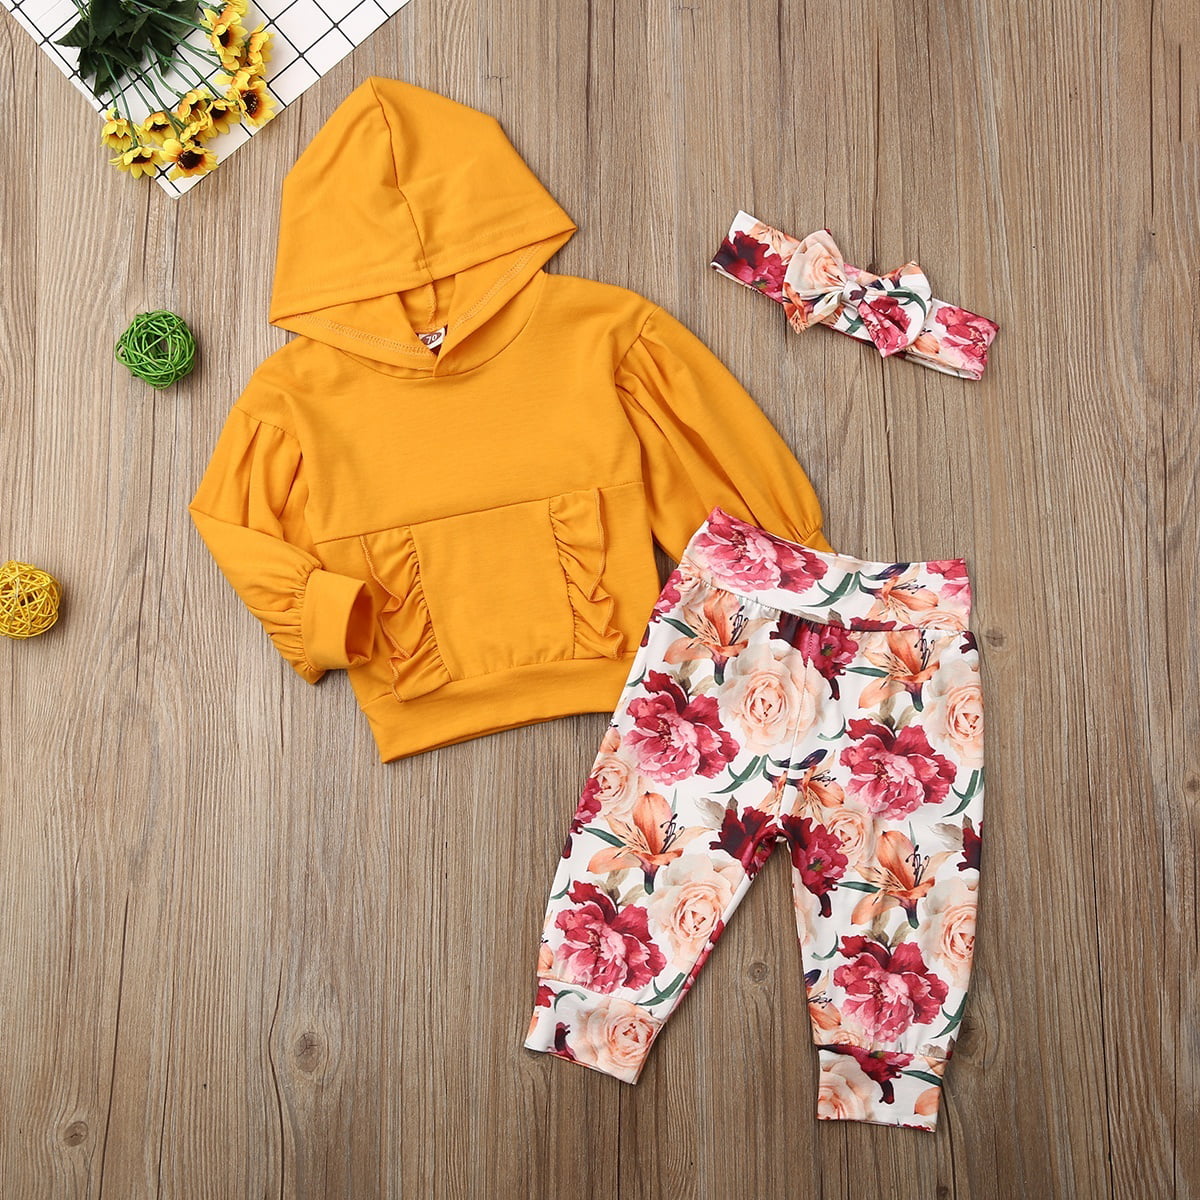 Toddler Infant Baby Girl Floral Hooded Tops Pants Headband Set Tracksuit Clothes 